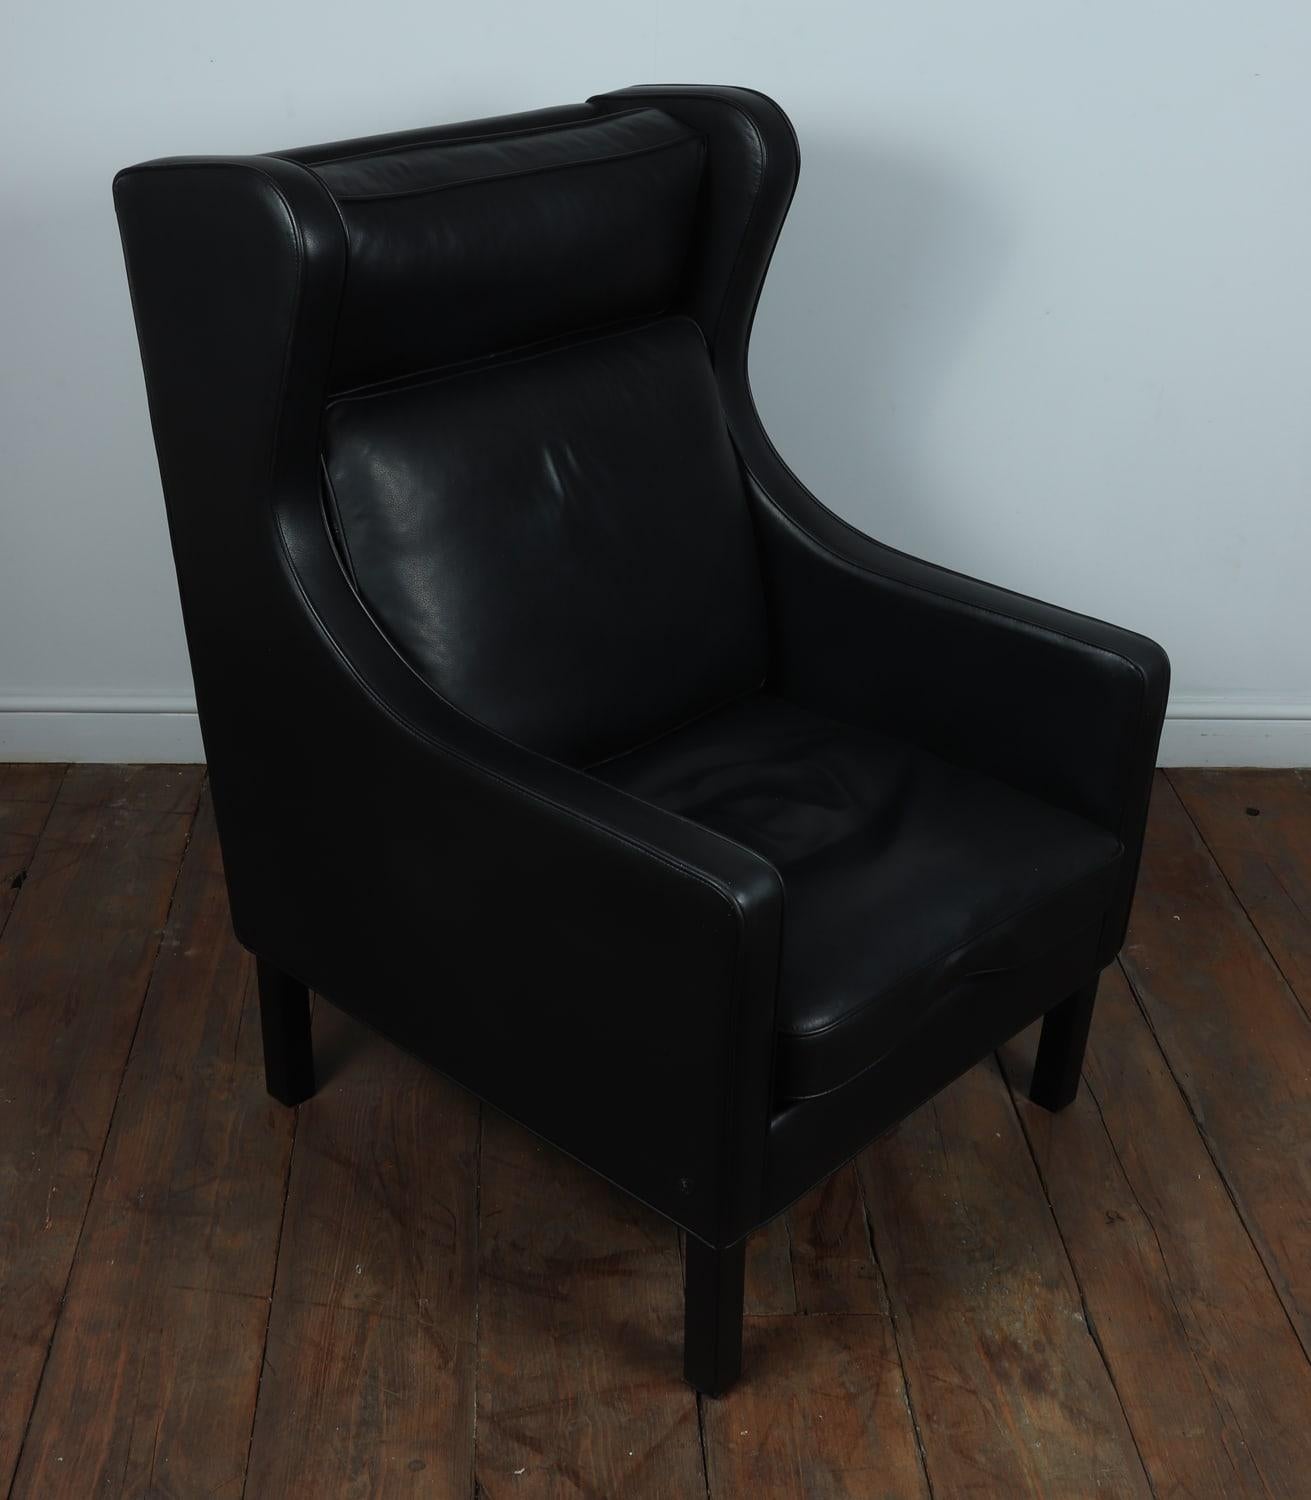 Danish, Mid-Century Modern, Wing Chair in Black Leather by Hurup, circa 1980 For Sale 10